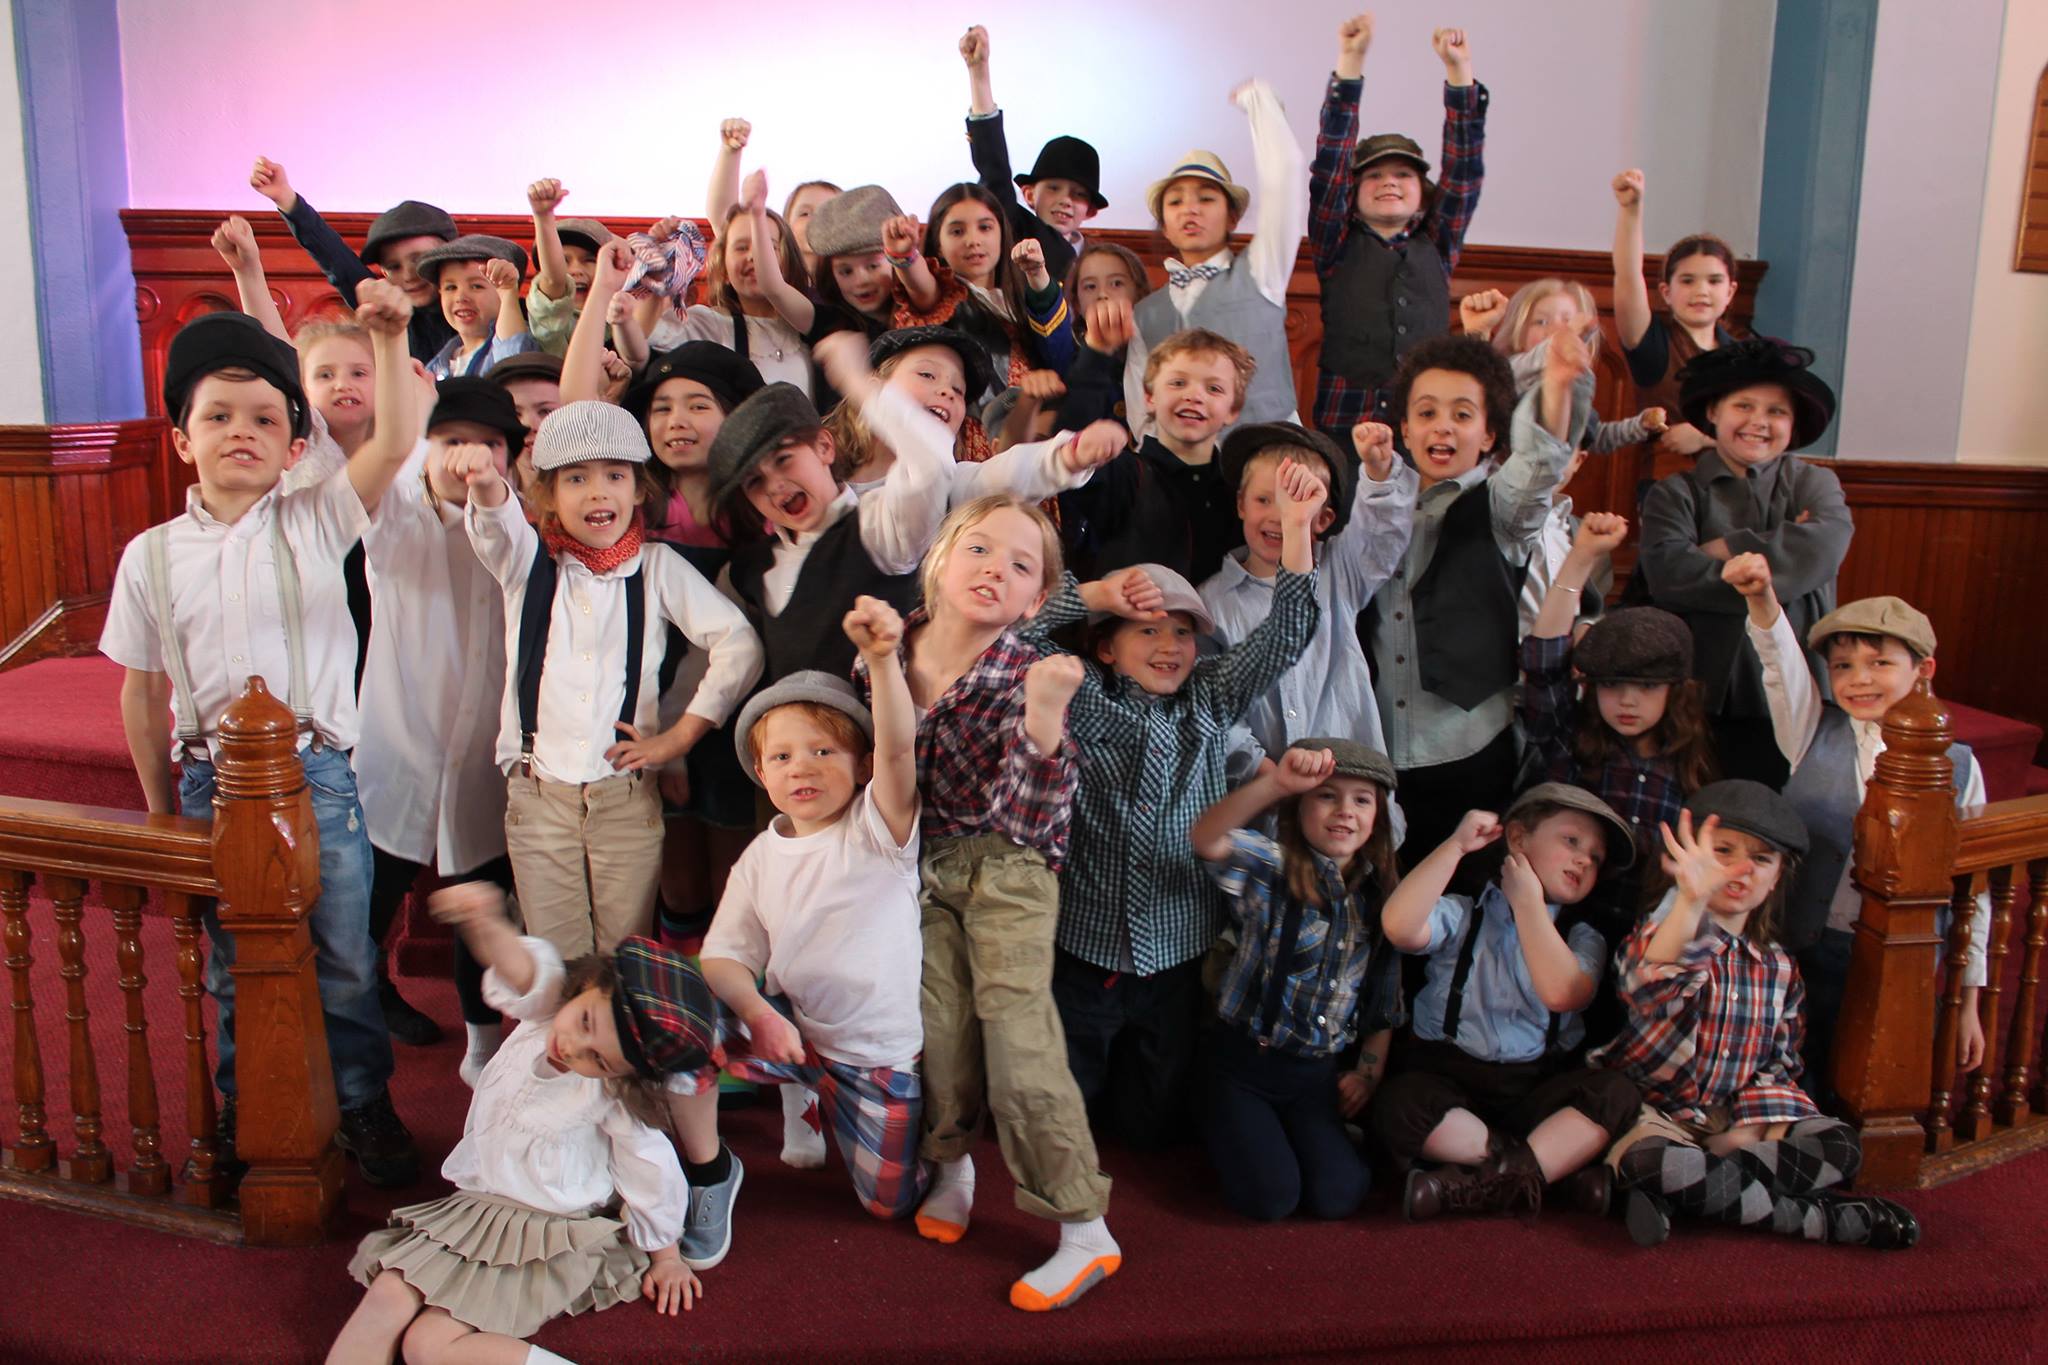 A large cluster of young kids dressed as 1899 Newsies pose for the camera